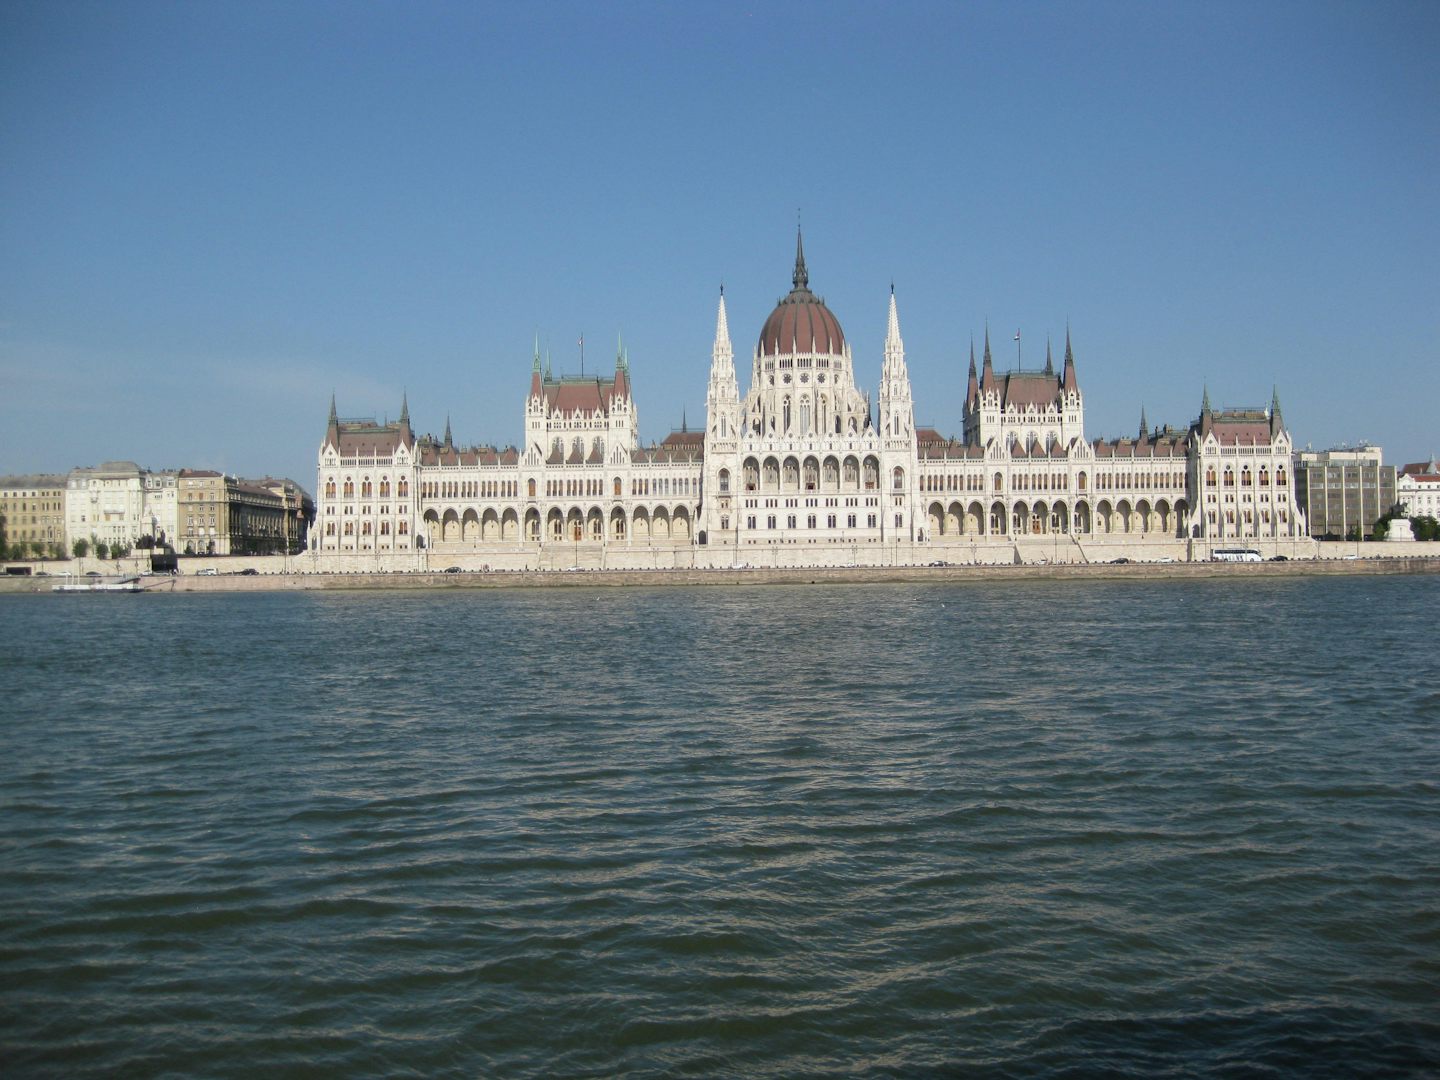 Budapest Parliament from Scenic Amber in Port